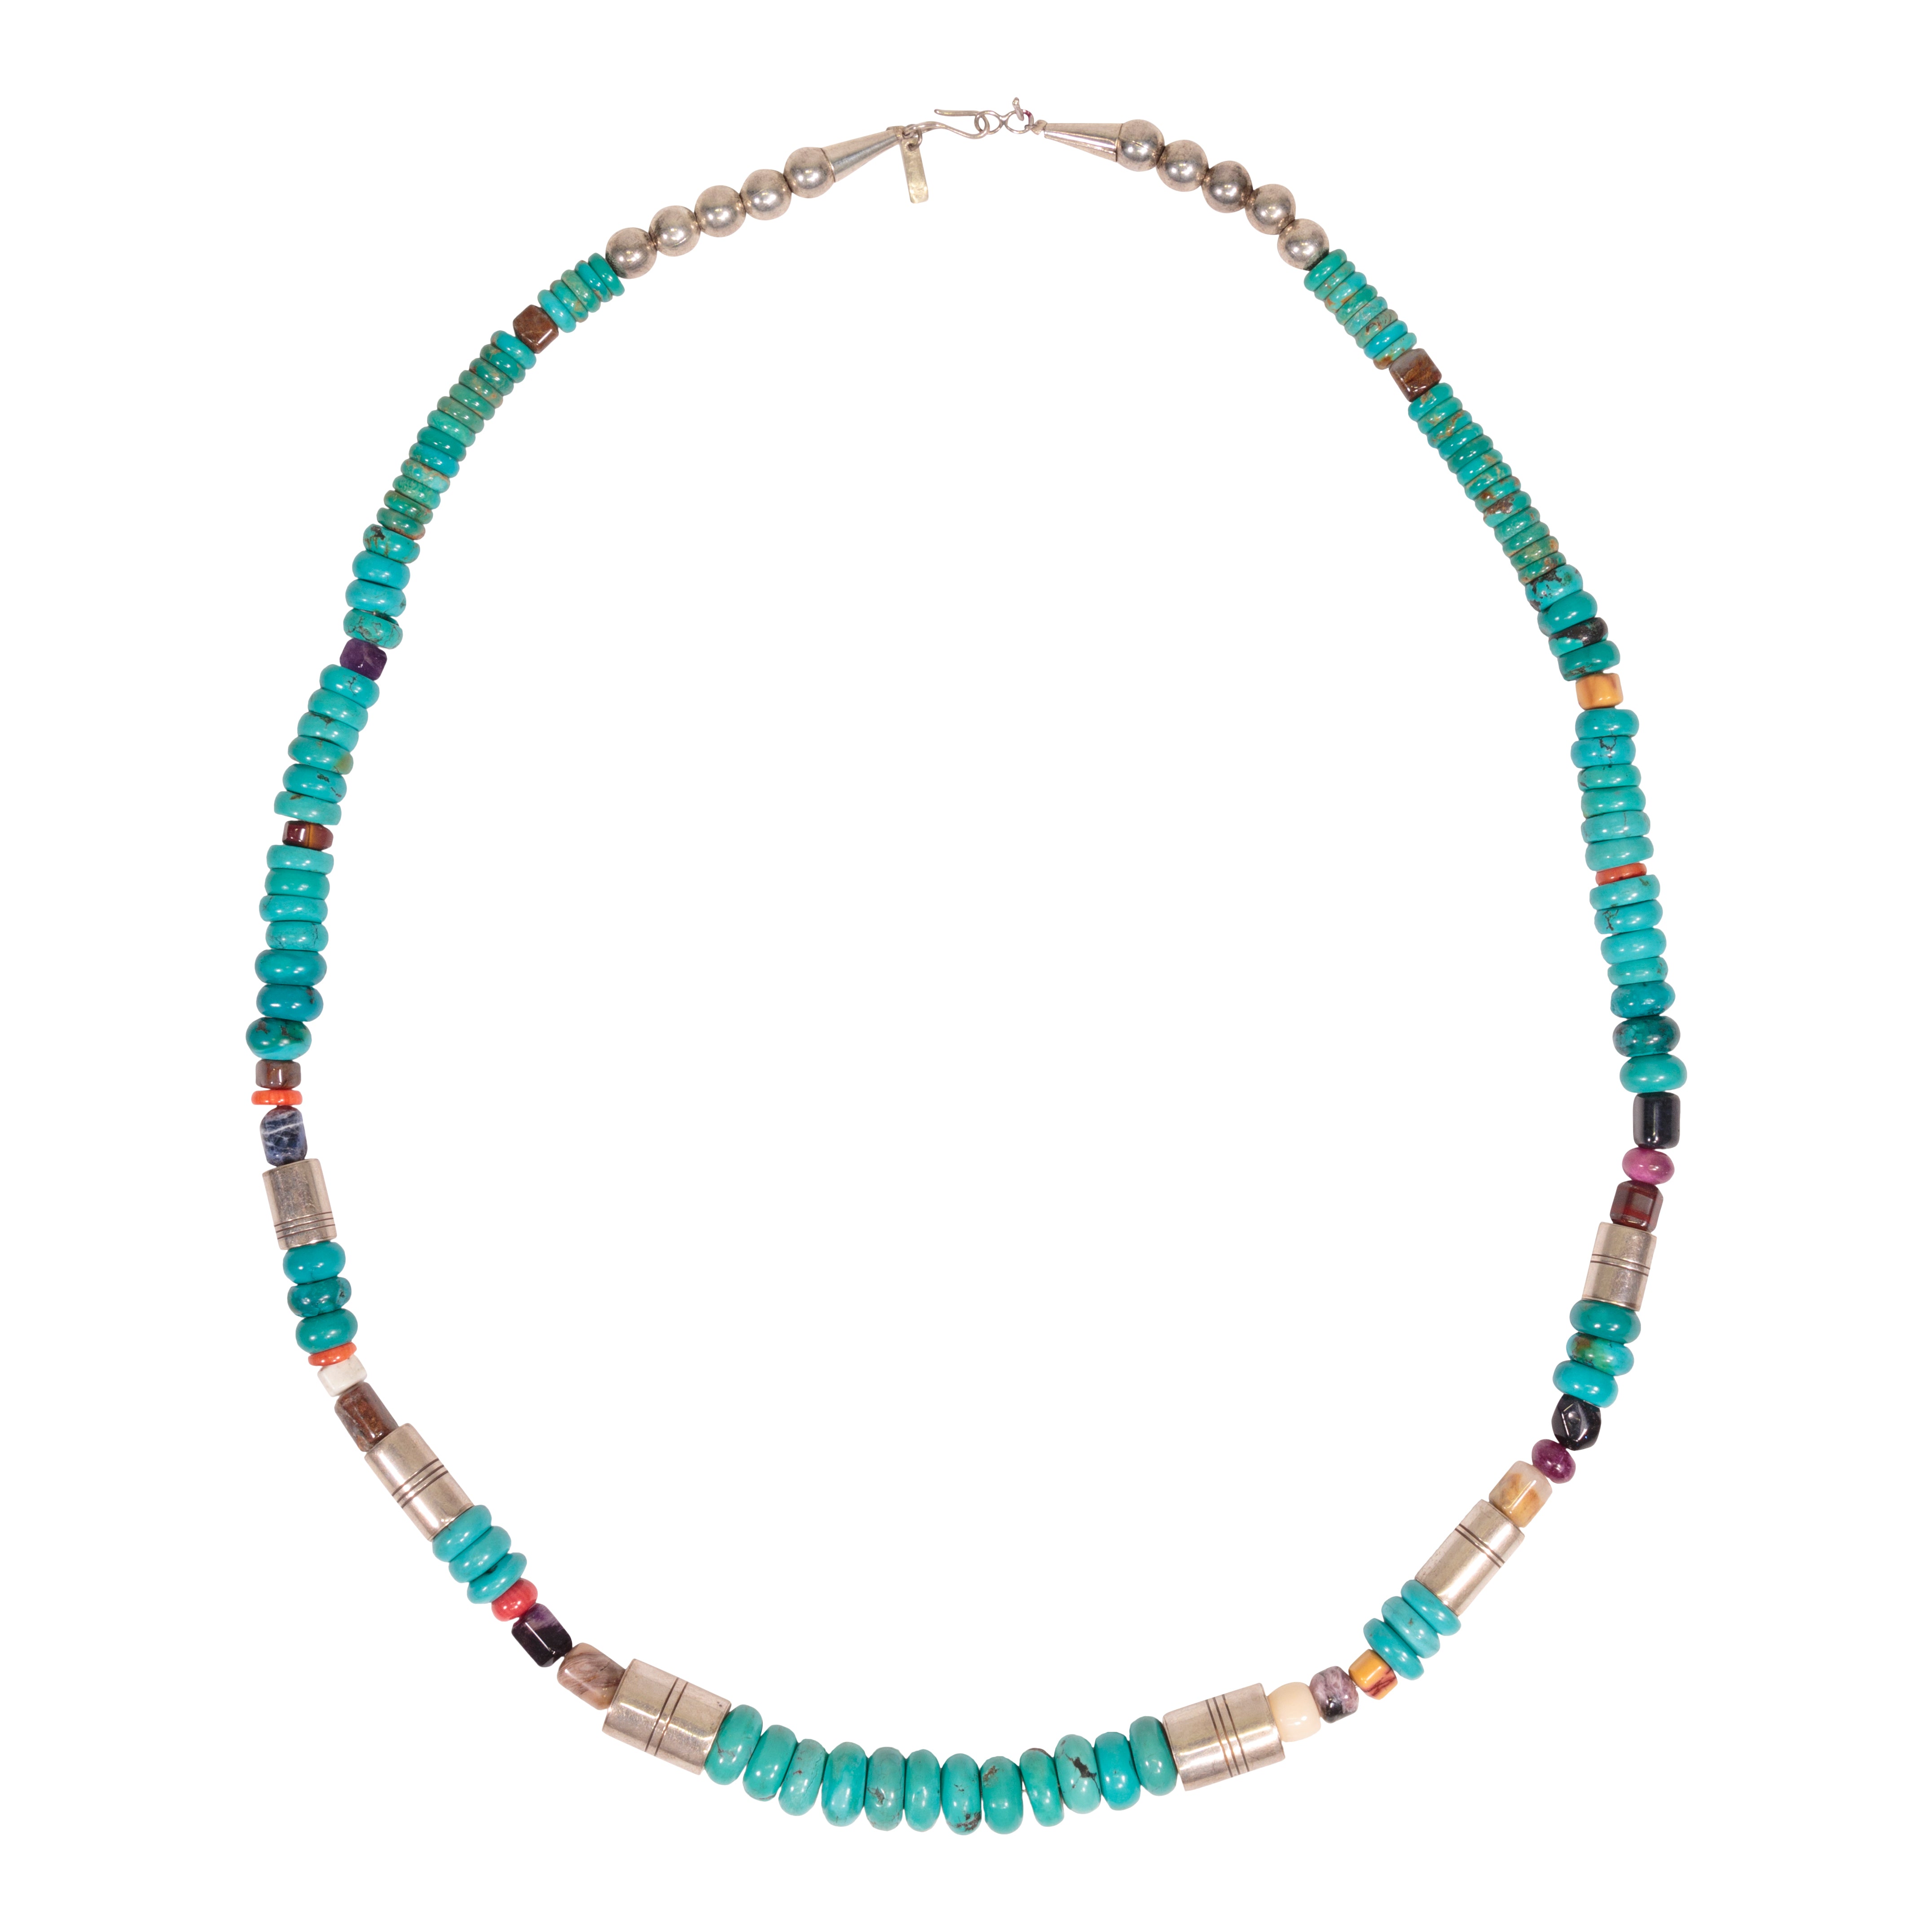 Tommy Singer Turquoise and Silver Barrel Necklace, Jewelry, Necklace, Native